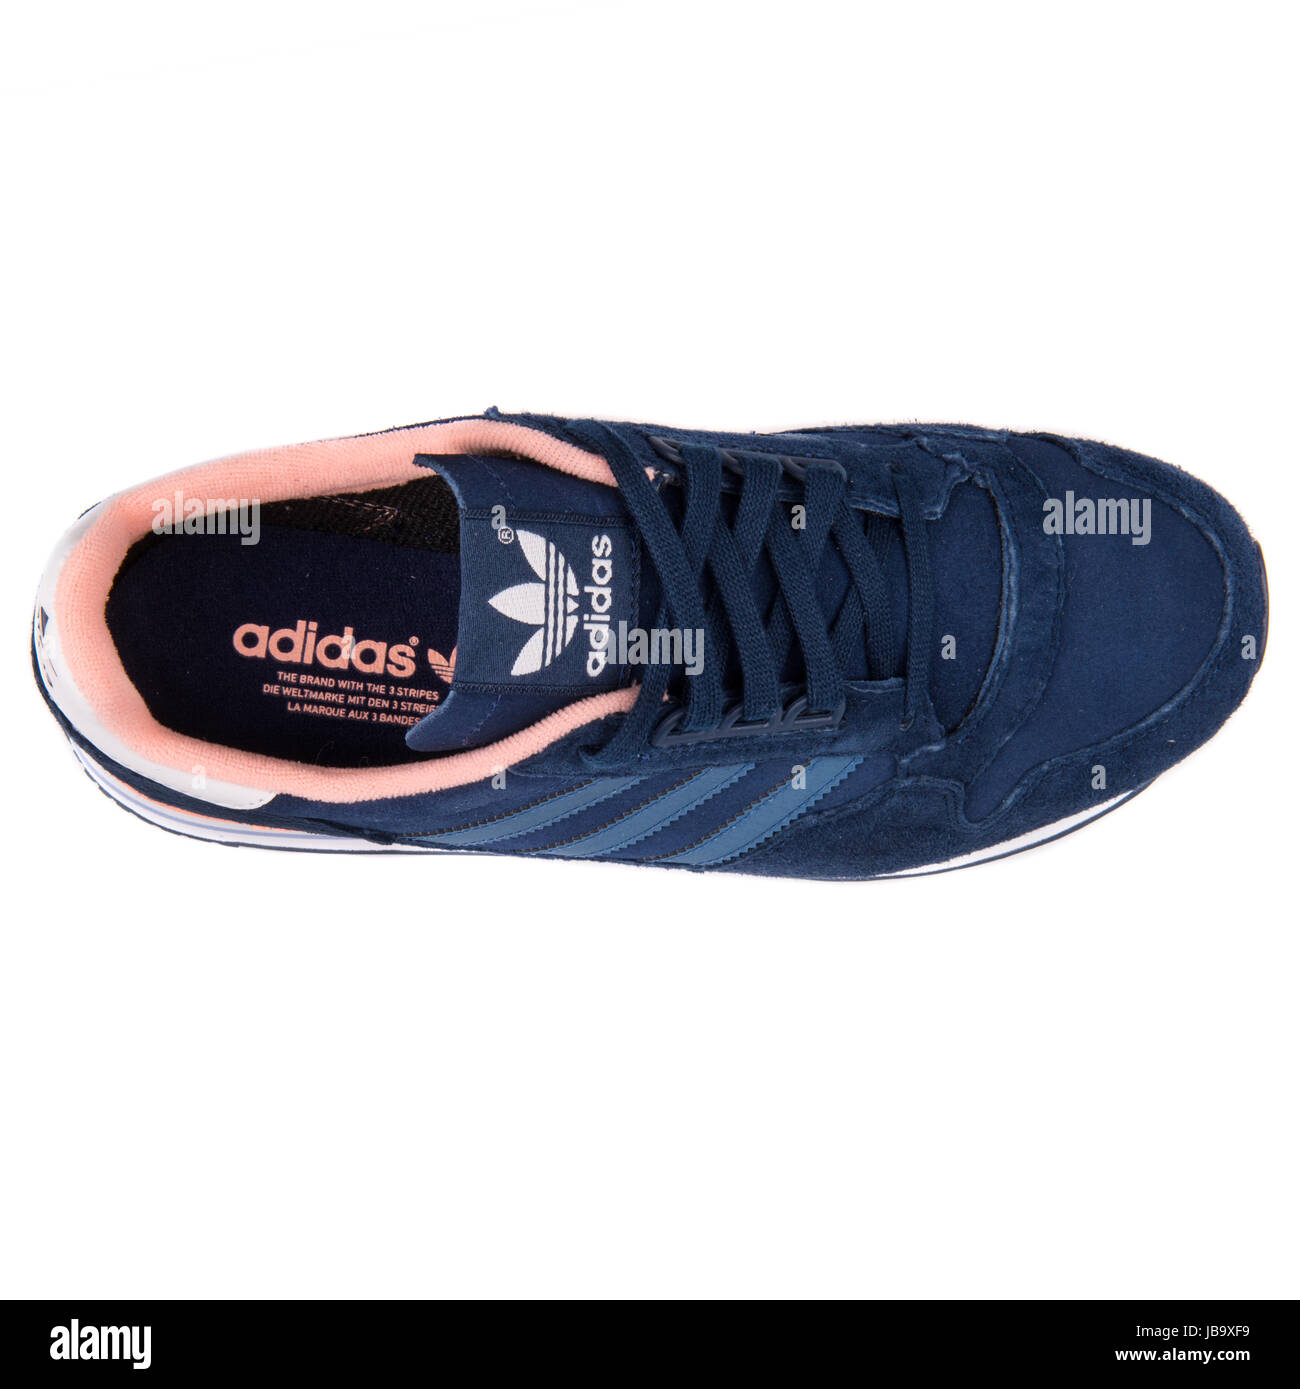 Adidas ZX 500 OG W Dark Blue and Rose Women's Running Shoes - B25603 Stock  Photo - Alamy